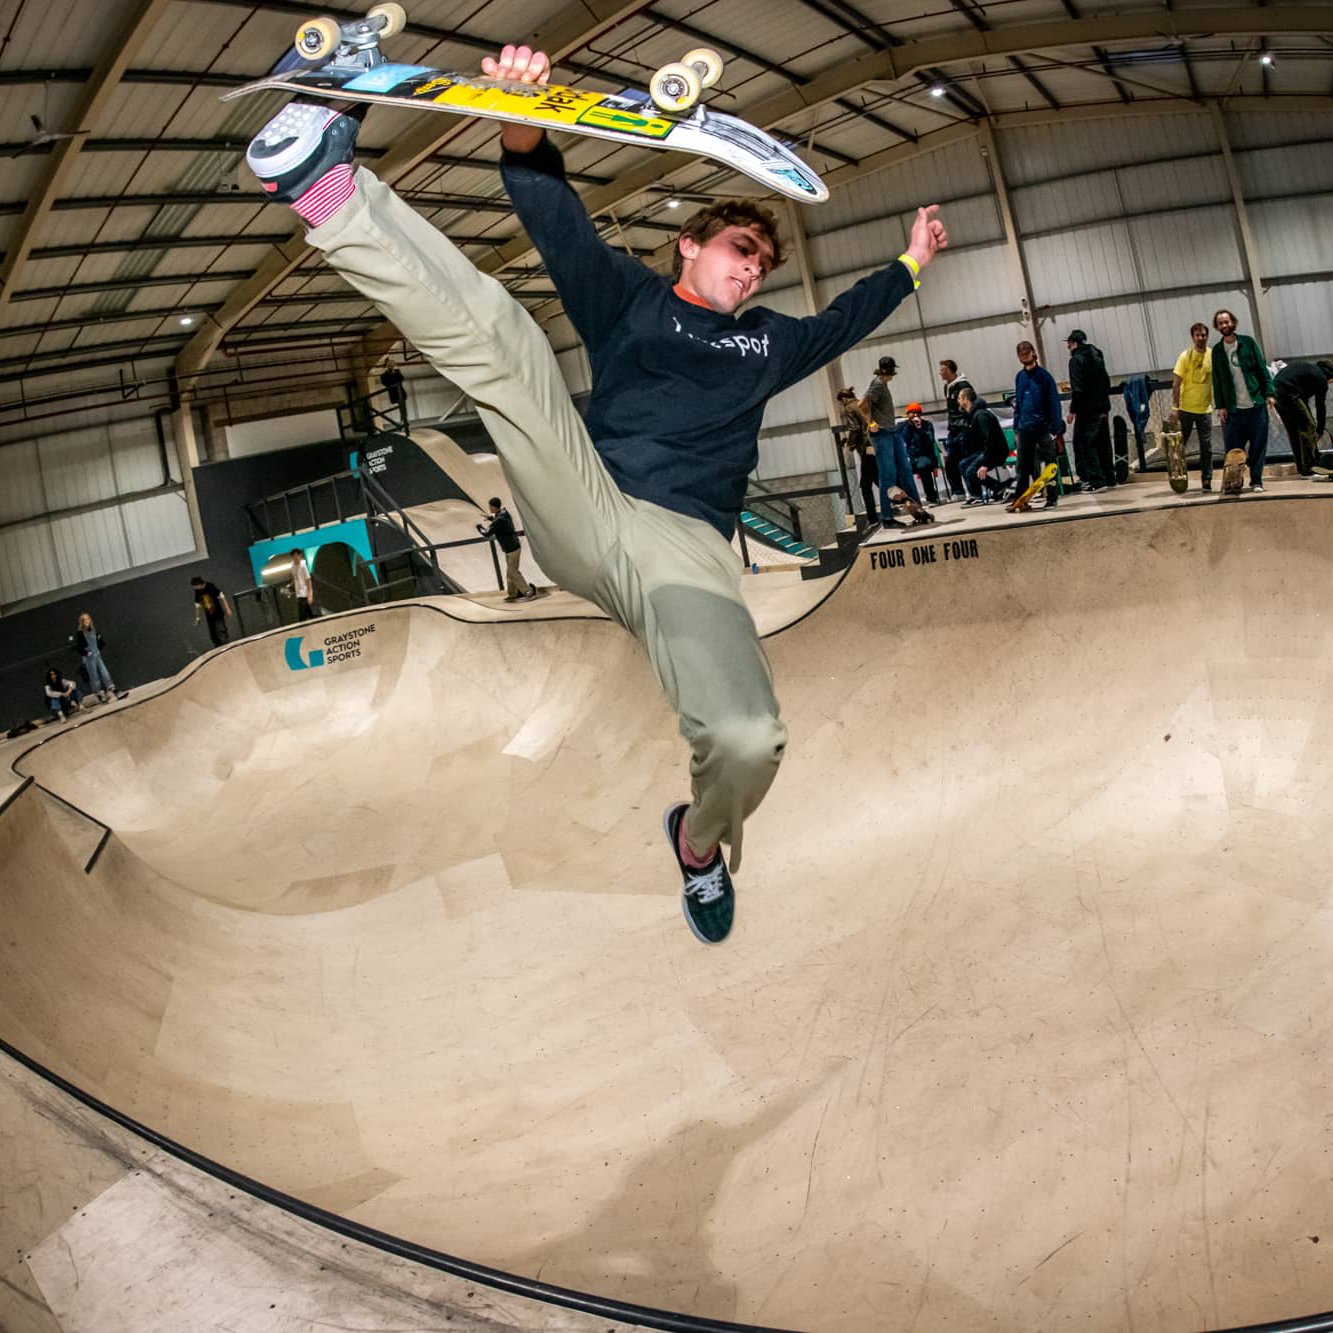 graystone action sports academy manchester review tips skateboarding in greater manchester u k